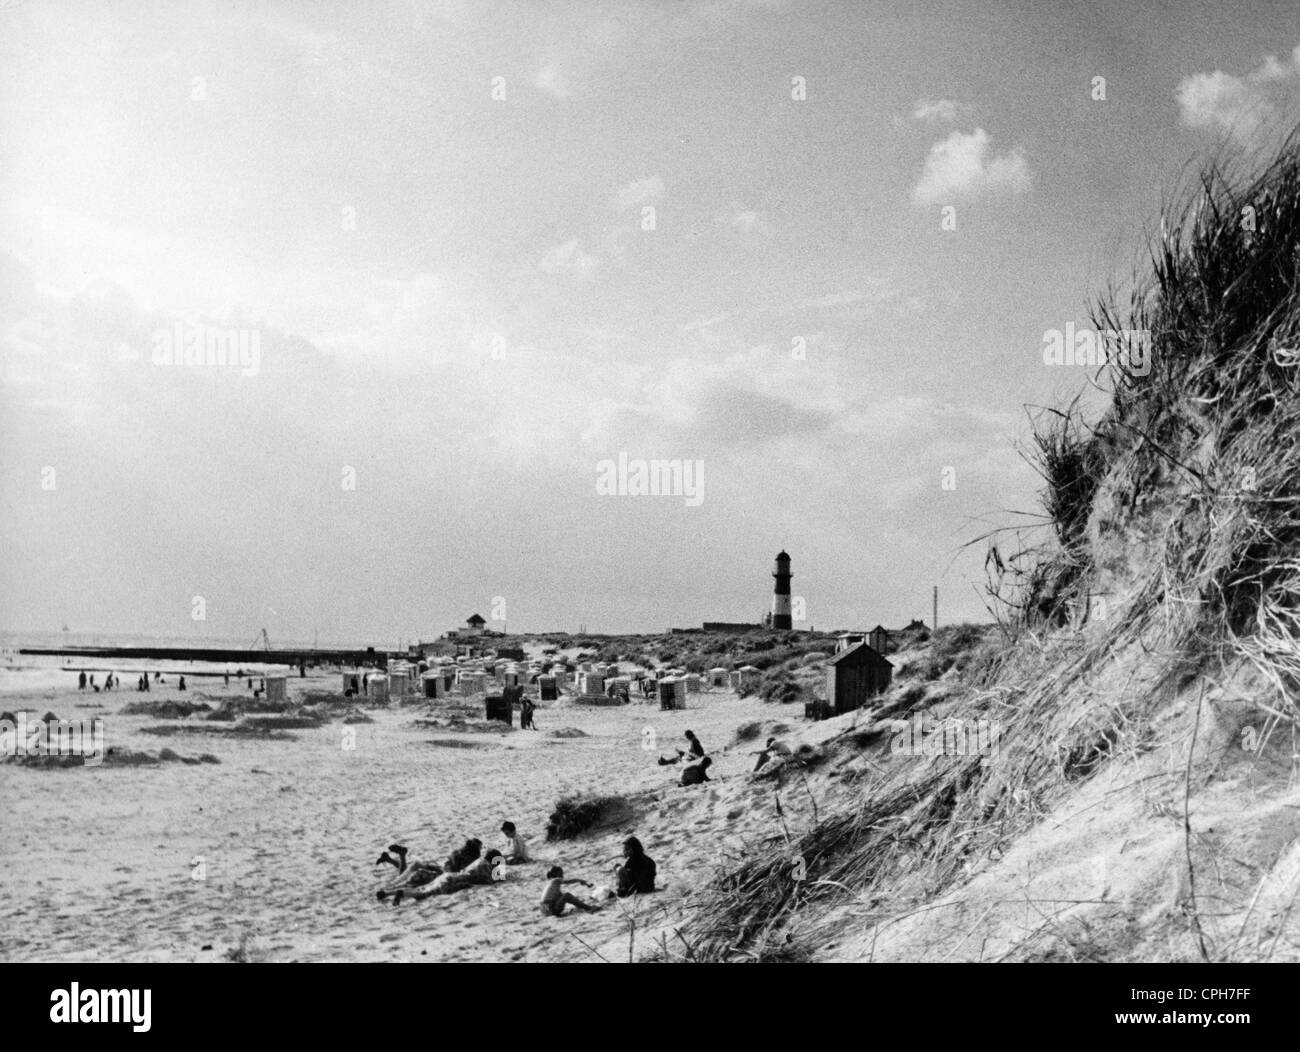 Germany, isle, Borkum, southern beach, 1950s, Additional-Rights-Clearences-Not Available Stock Photo